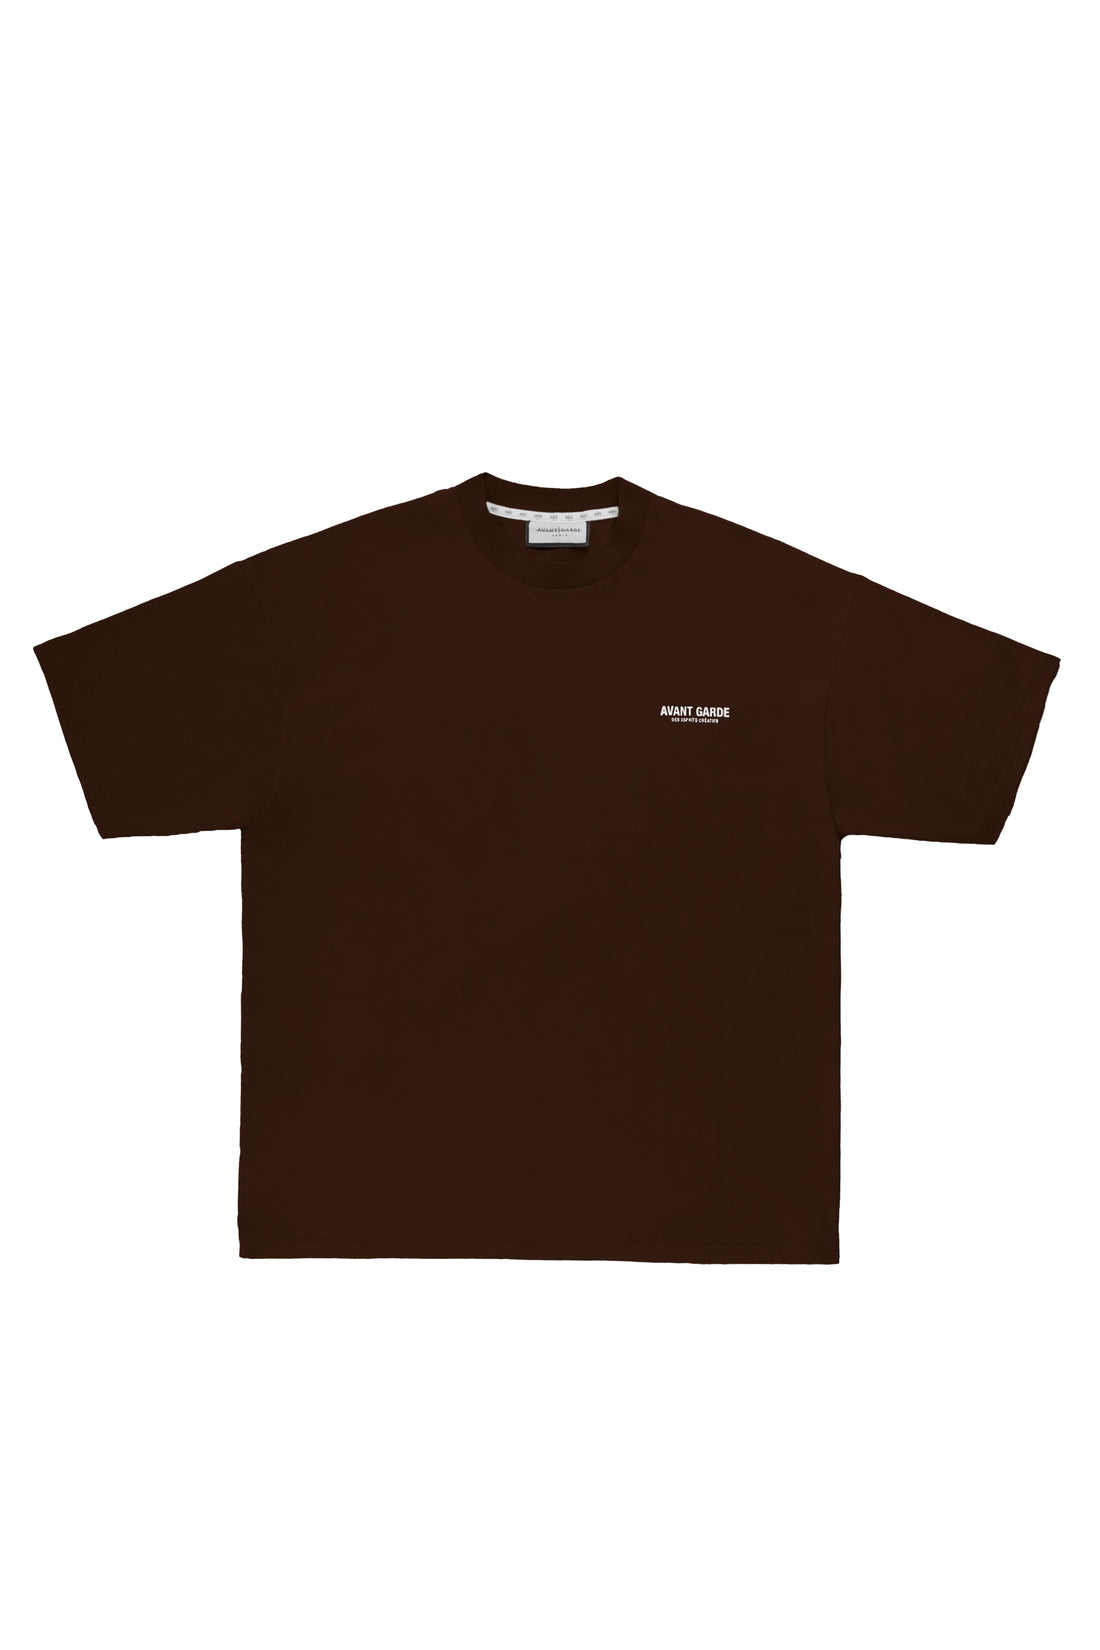 Front of branded mens t-shirt in chocolate brown